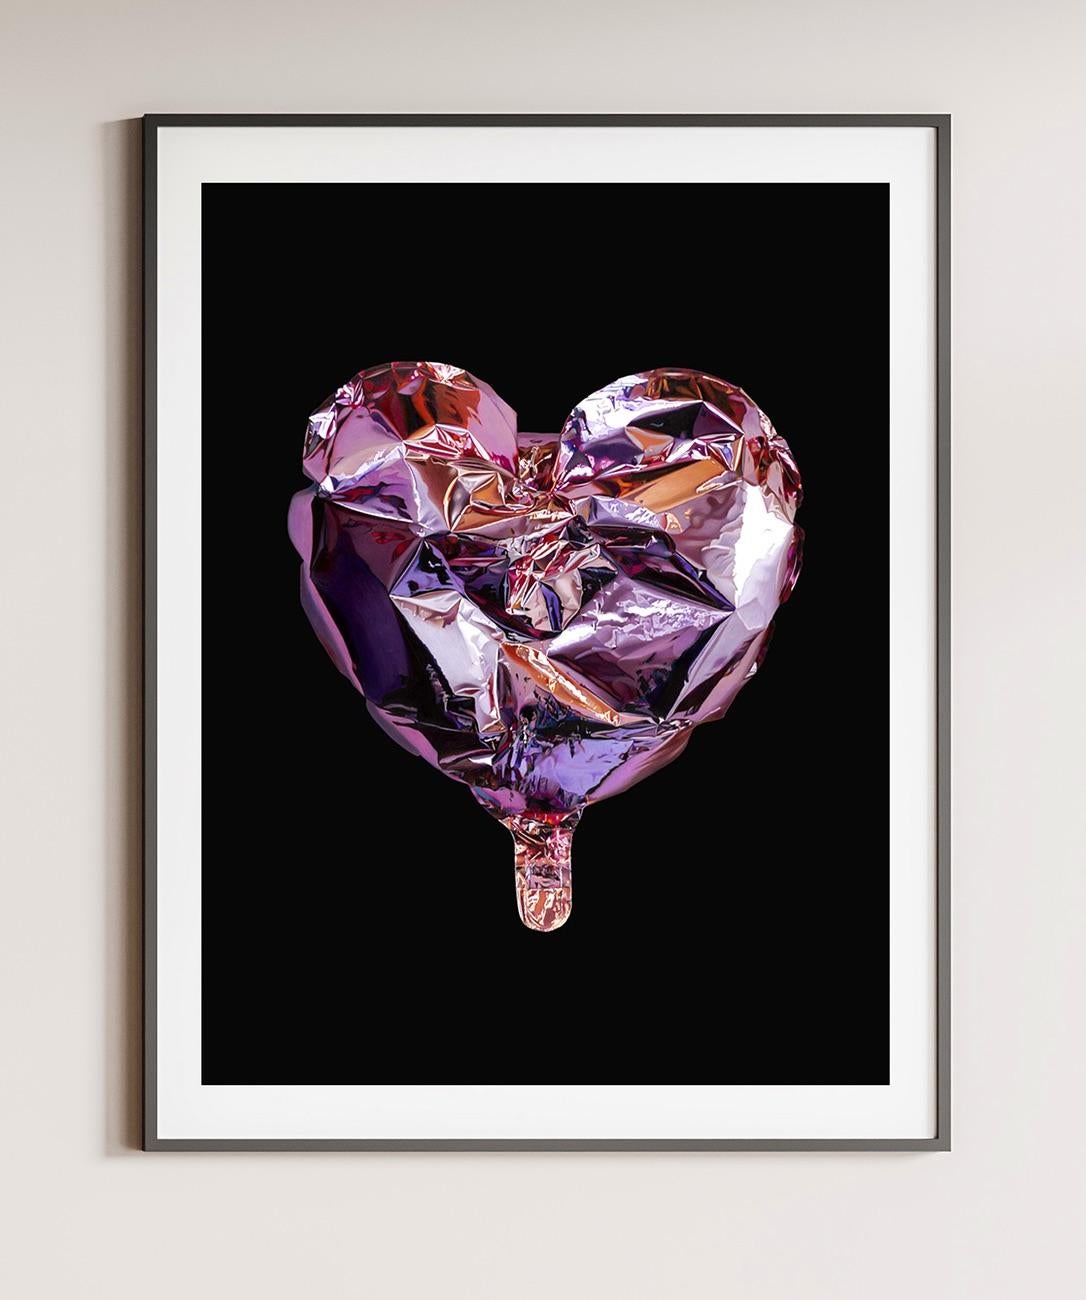 • 80 x 100cm A study in Rose Gold, painstakingly drawn in Jack's hyper-realism style with coloured pencil, and printed on museum quality 100% cotton paper. Set on a dramatic black background. 'Rose-Tinted' is a limited edition giclée print of a